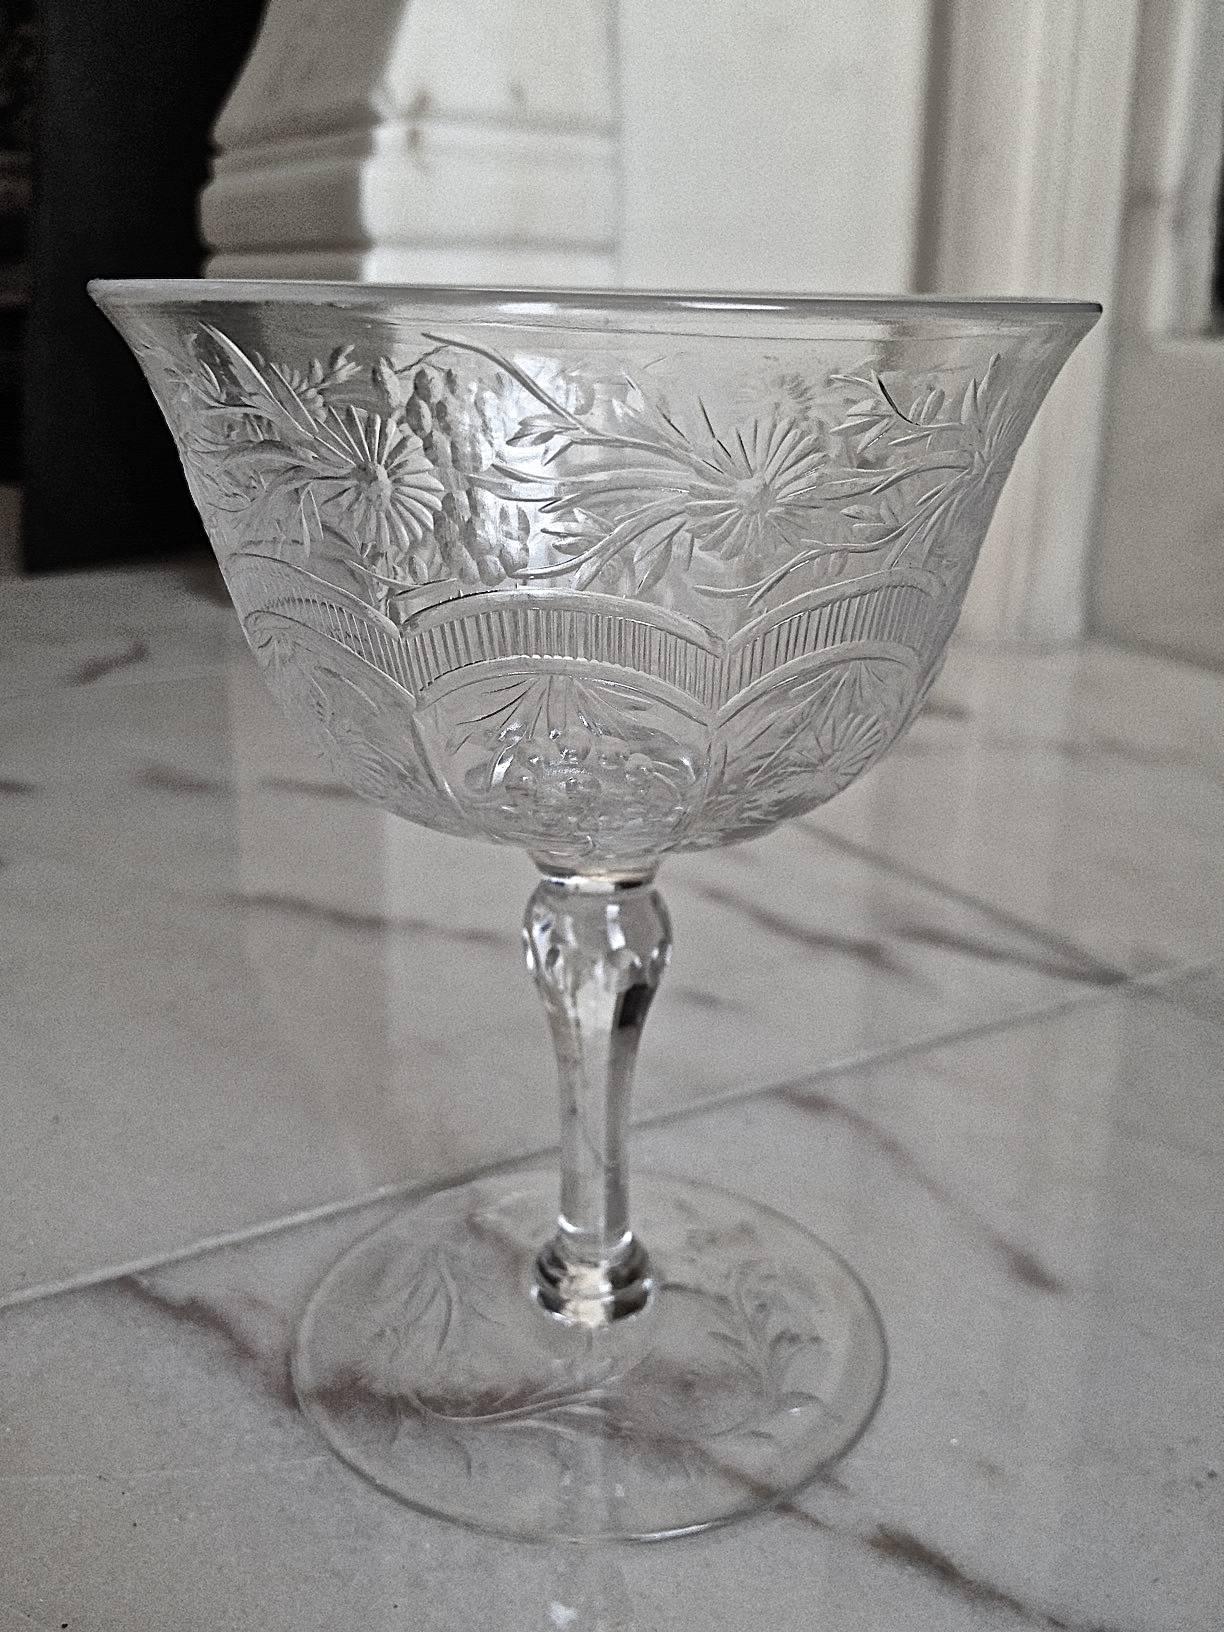 A fantastic set of exceptionally wheel cut-glass stemware, sorry it is most hard
to photograph clear glass, it is crystal clear and covered with flowers and vines
also with ribbing and raised panels to the bottom of the bowl causing a 3d